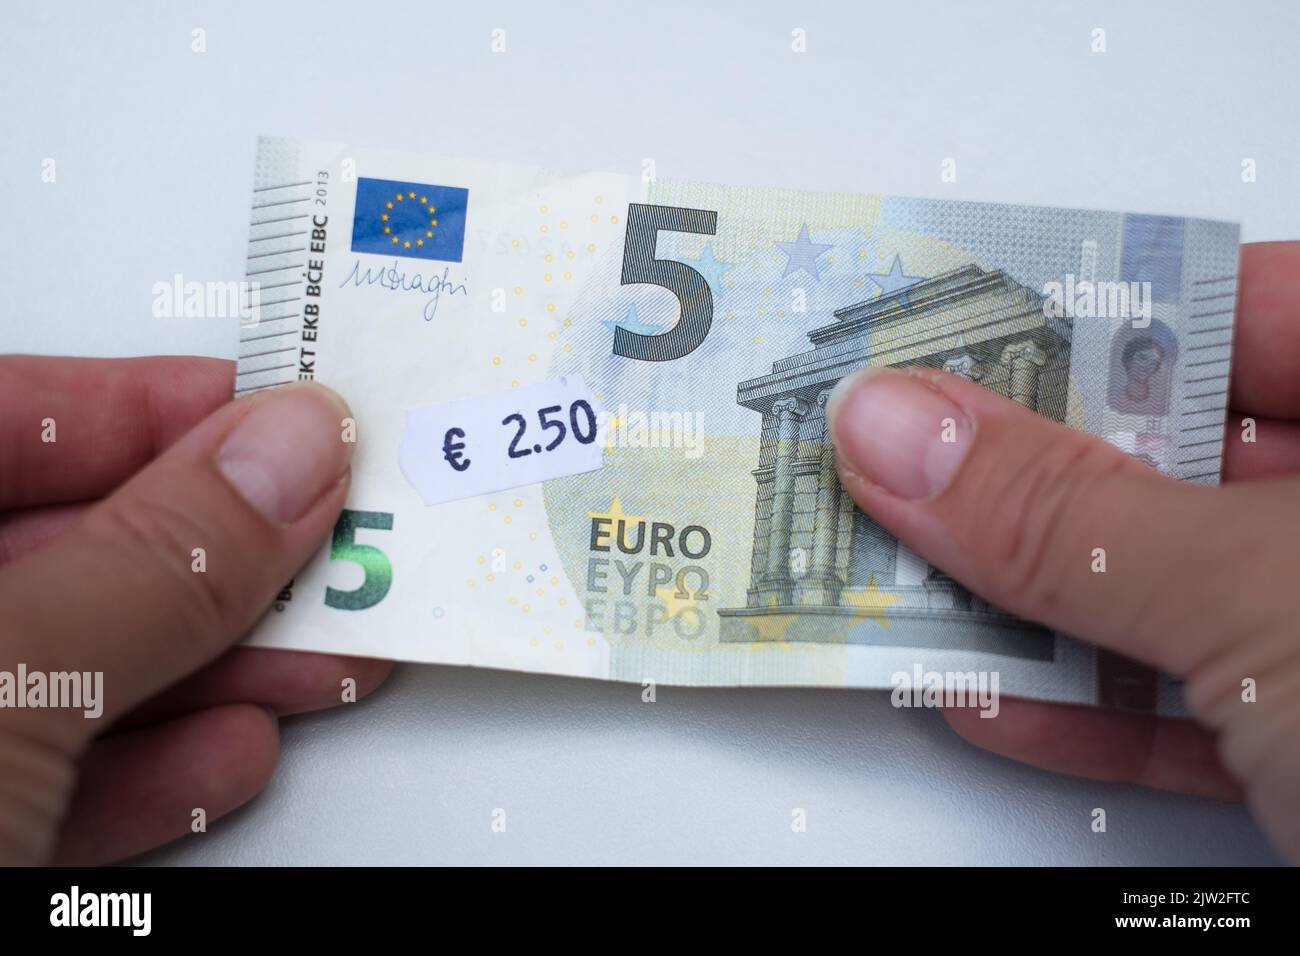 Five euro banknote with 2 euro 5 cent price tag. Selective focus on label. Inflation in Europe, hyper inflation, devaluation of fiat money concept. Stock Photo